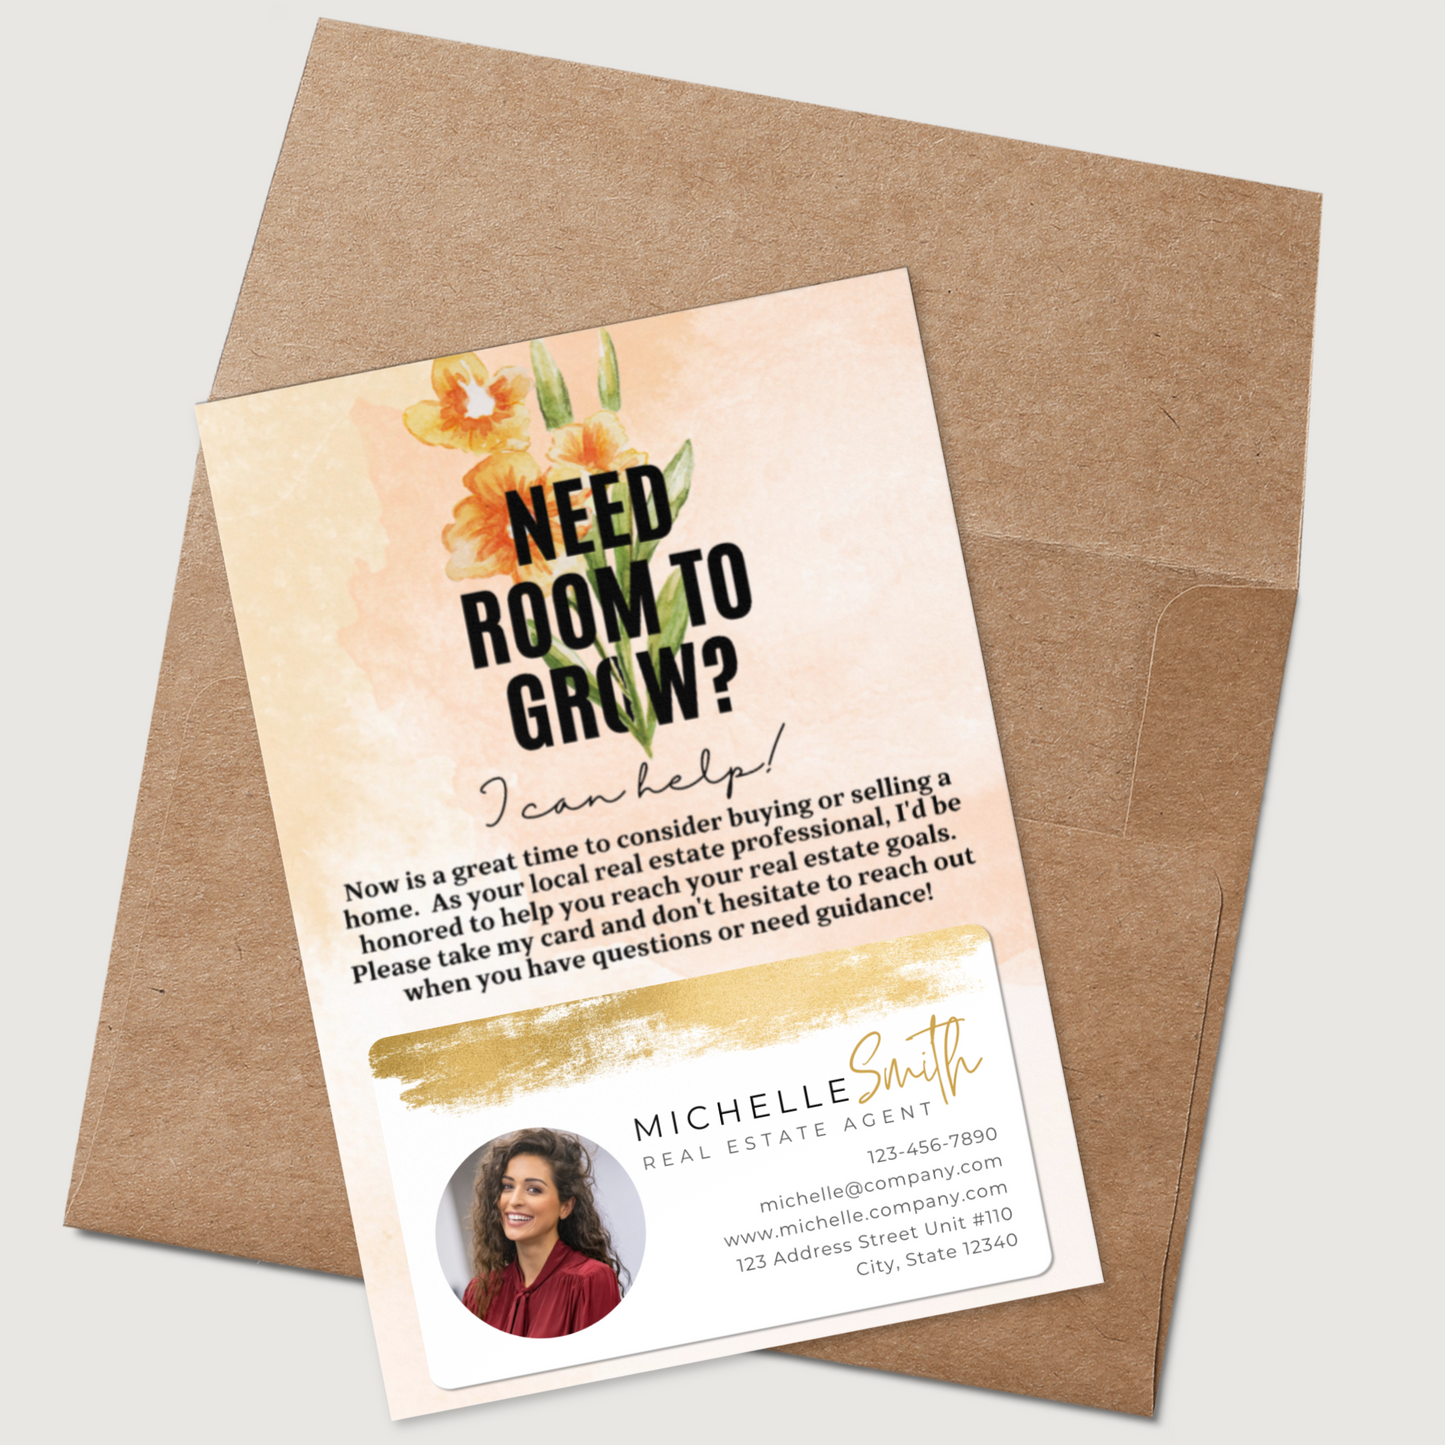 Need Room to Grow? - Set of Real Estate Prospecting Mailers